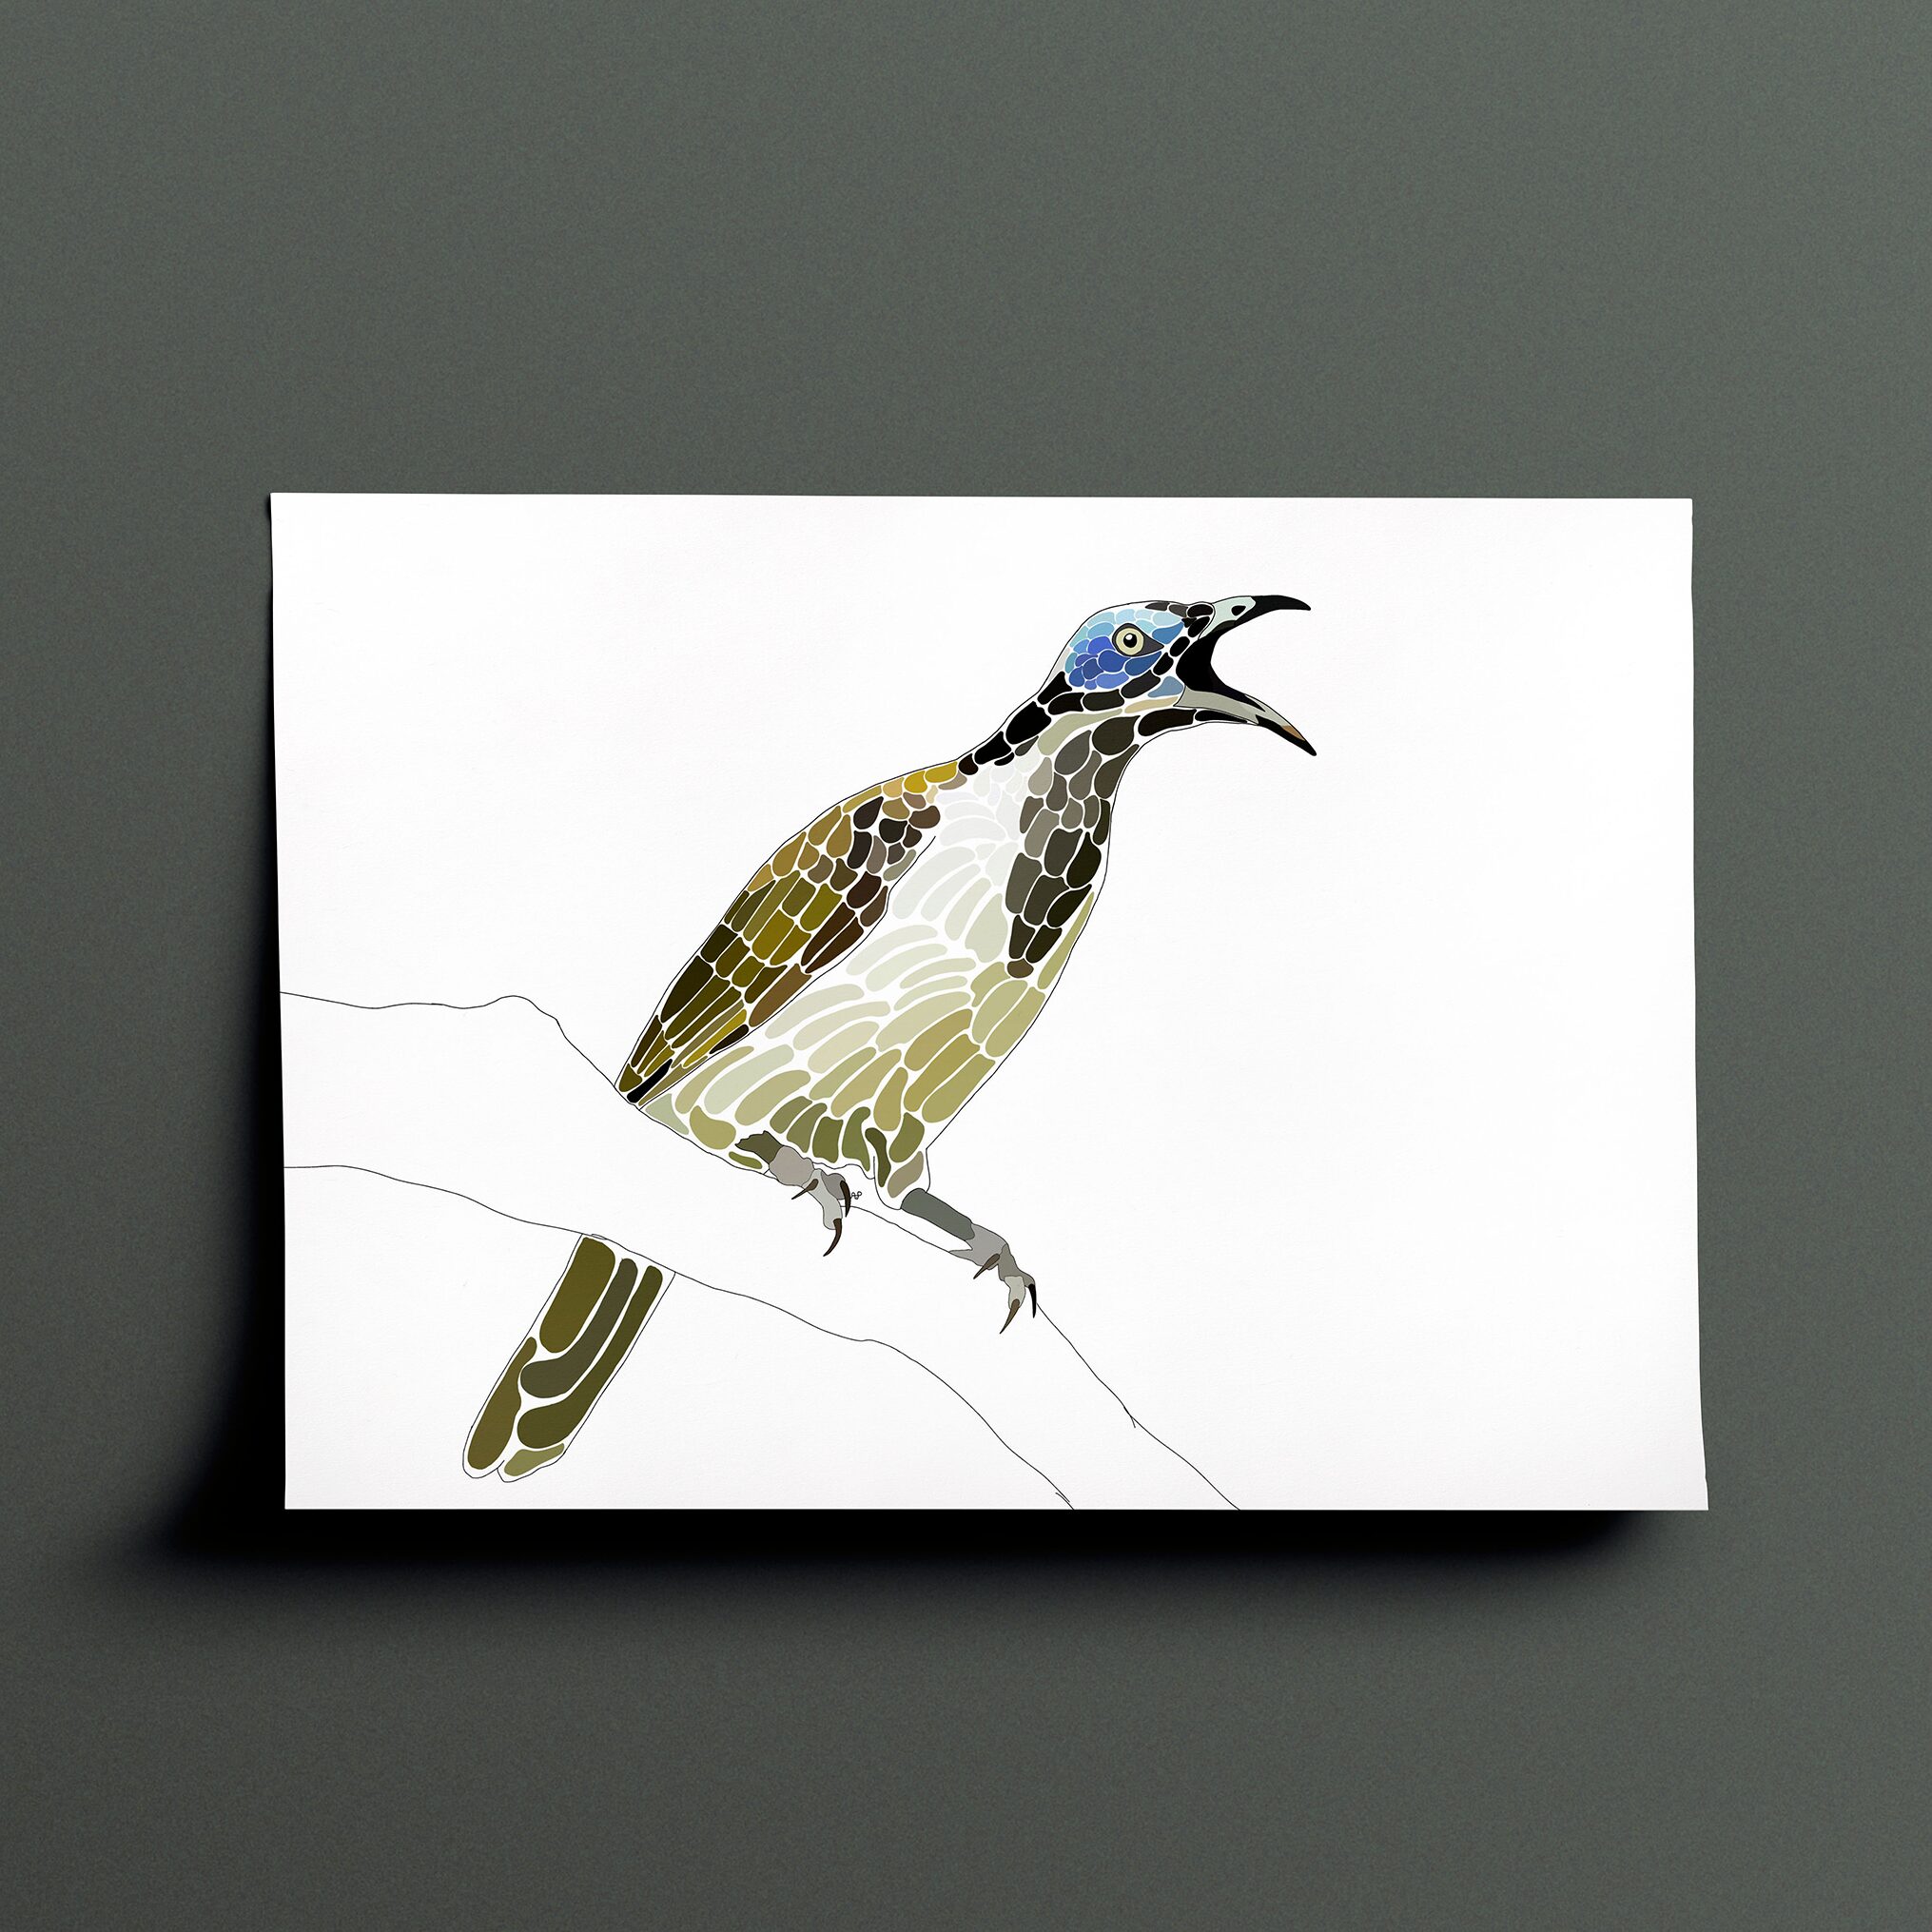 Amelia's interpenetration and vision of a blue-faced honeyeater in various shades of brown, green, grey and blue done in a terrazzo type style. The drawing is both of the birds side and front as it is perched on a branch with its beak wide open mid call. The bird is facing to the left of the page.